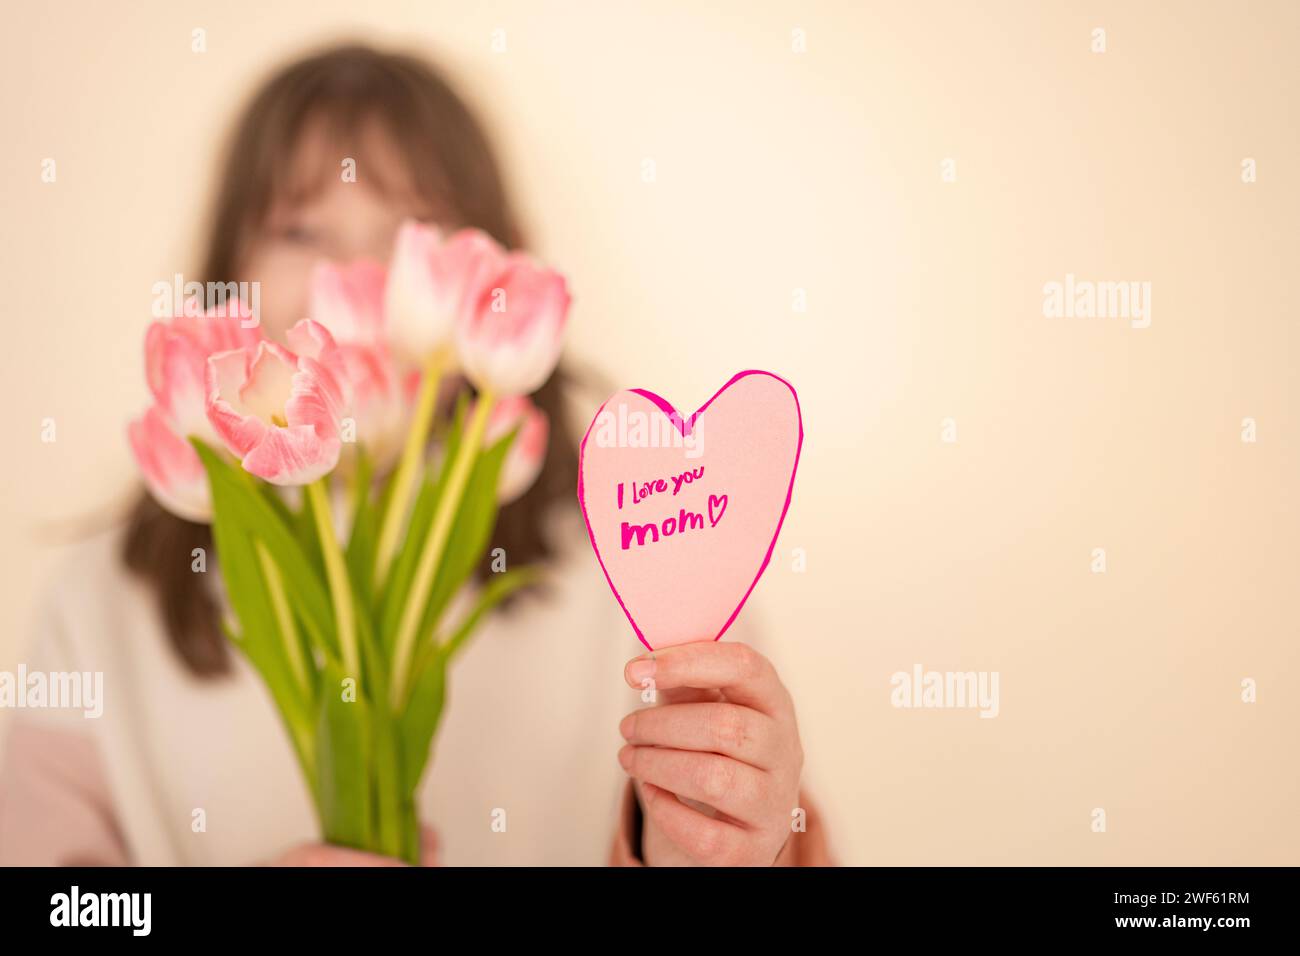 Mothers Day. daughter with flowers and card on a beige background.Laughing girl with tulips and heart card.Pink heart card and pink tulips close-up in Stock Photo